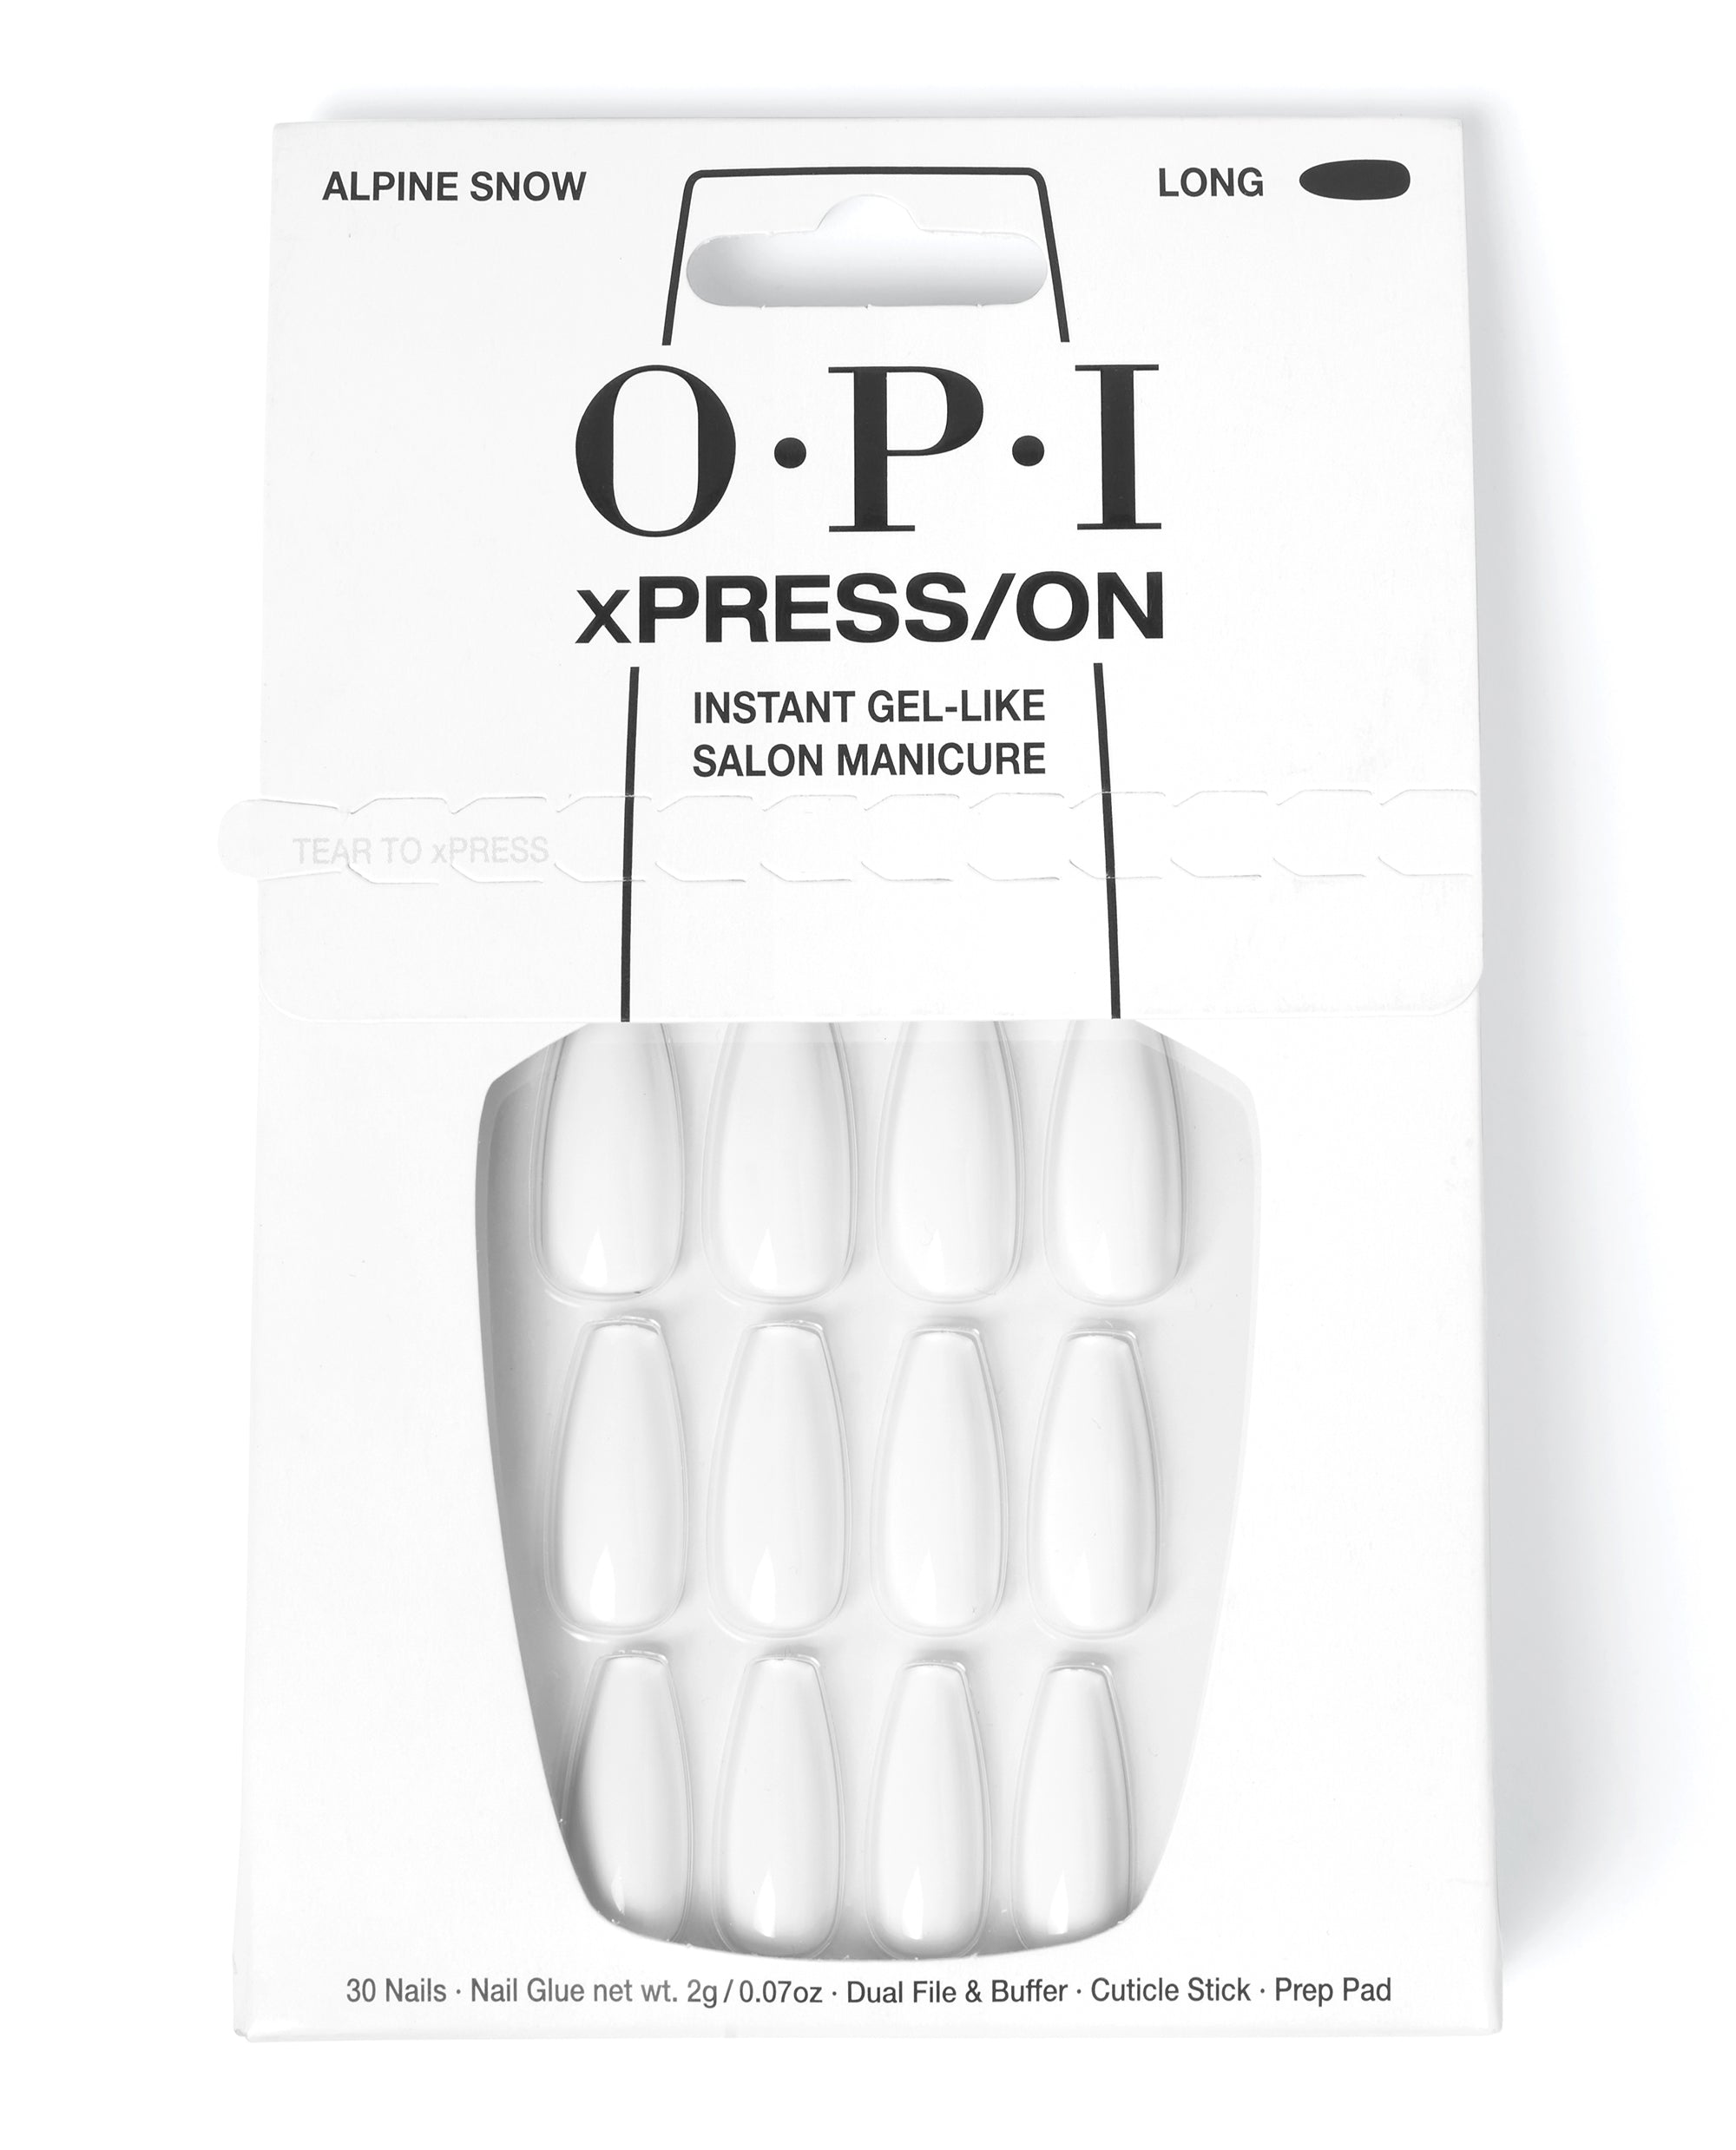 OPI®: All Ice on Alpine Snow® - Press-On Nails | xPRESS/ON